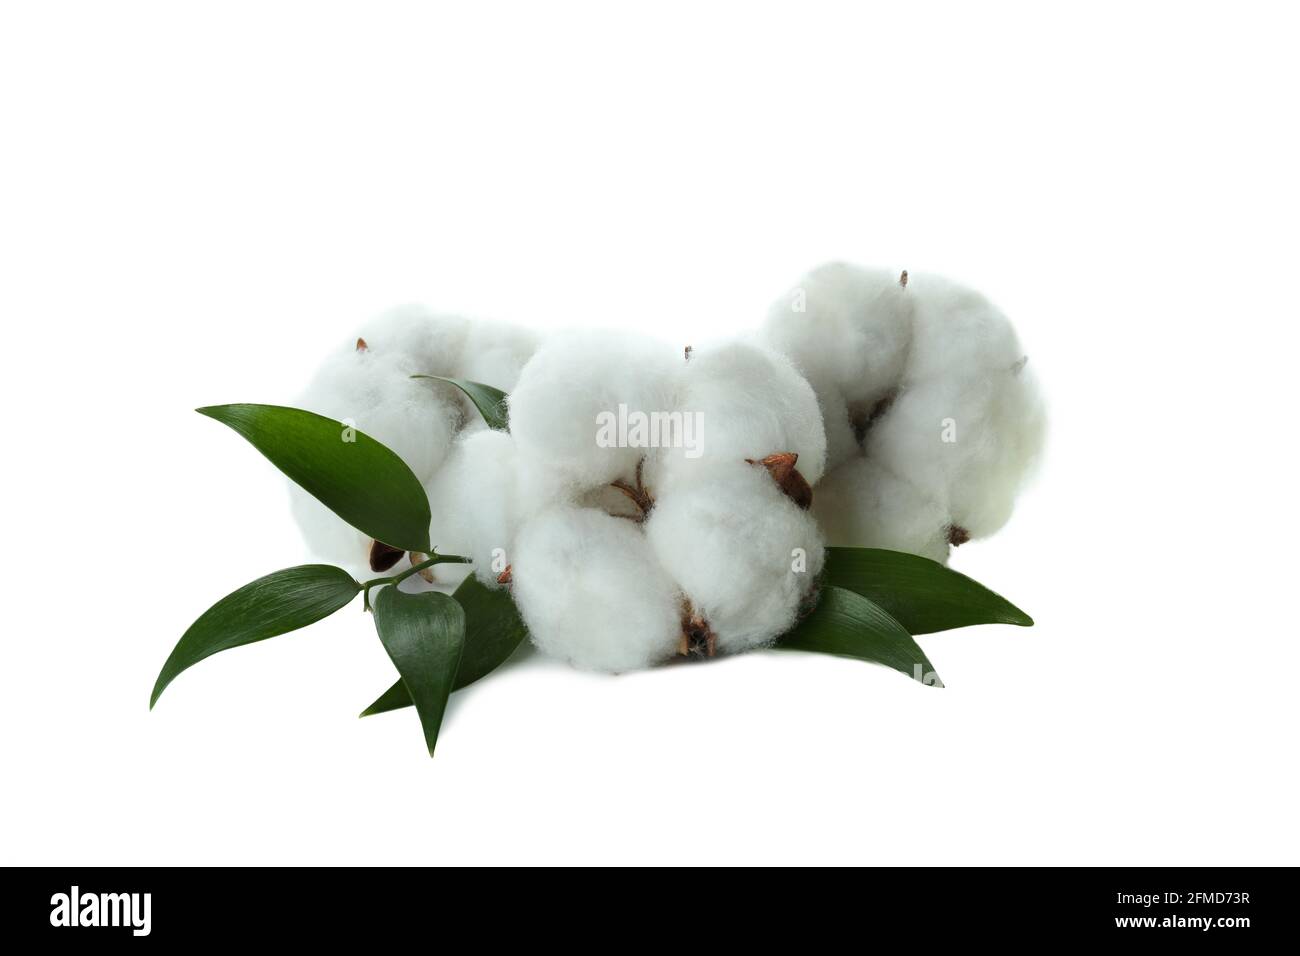 Cotton plant flowers isolated on white background Stock Photo